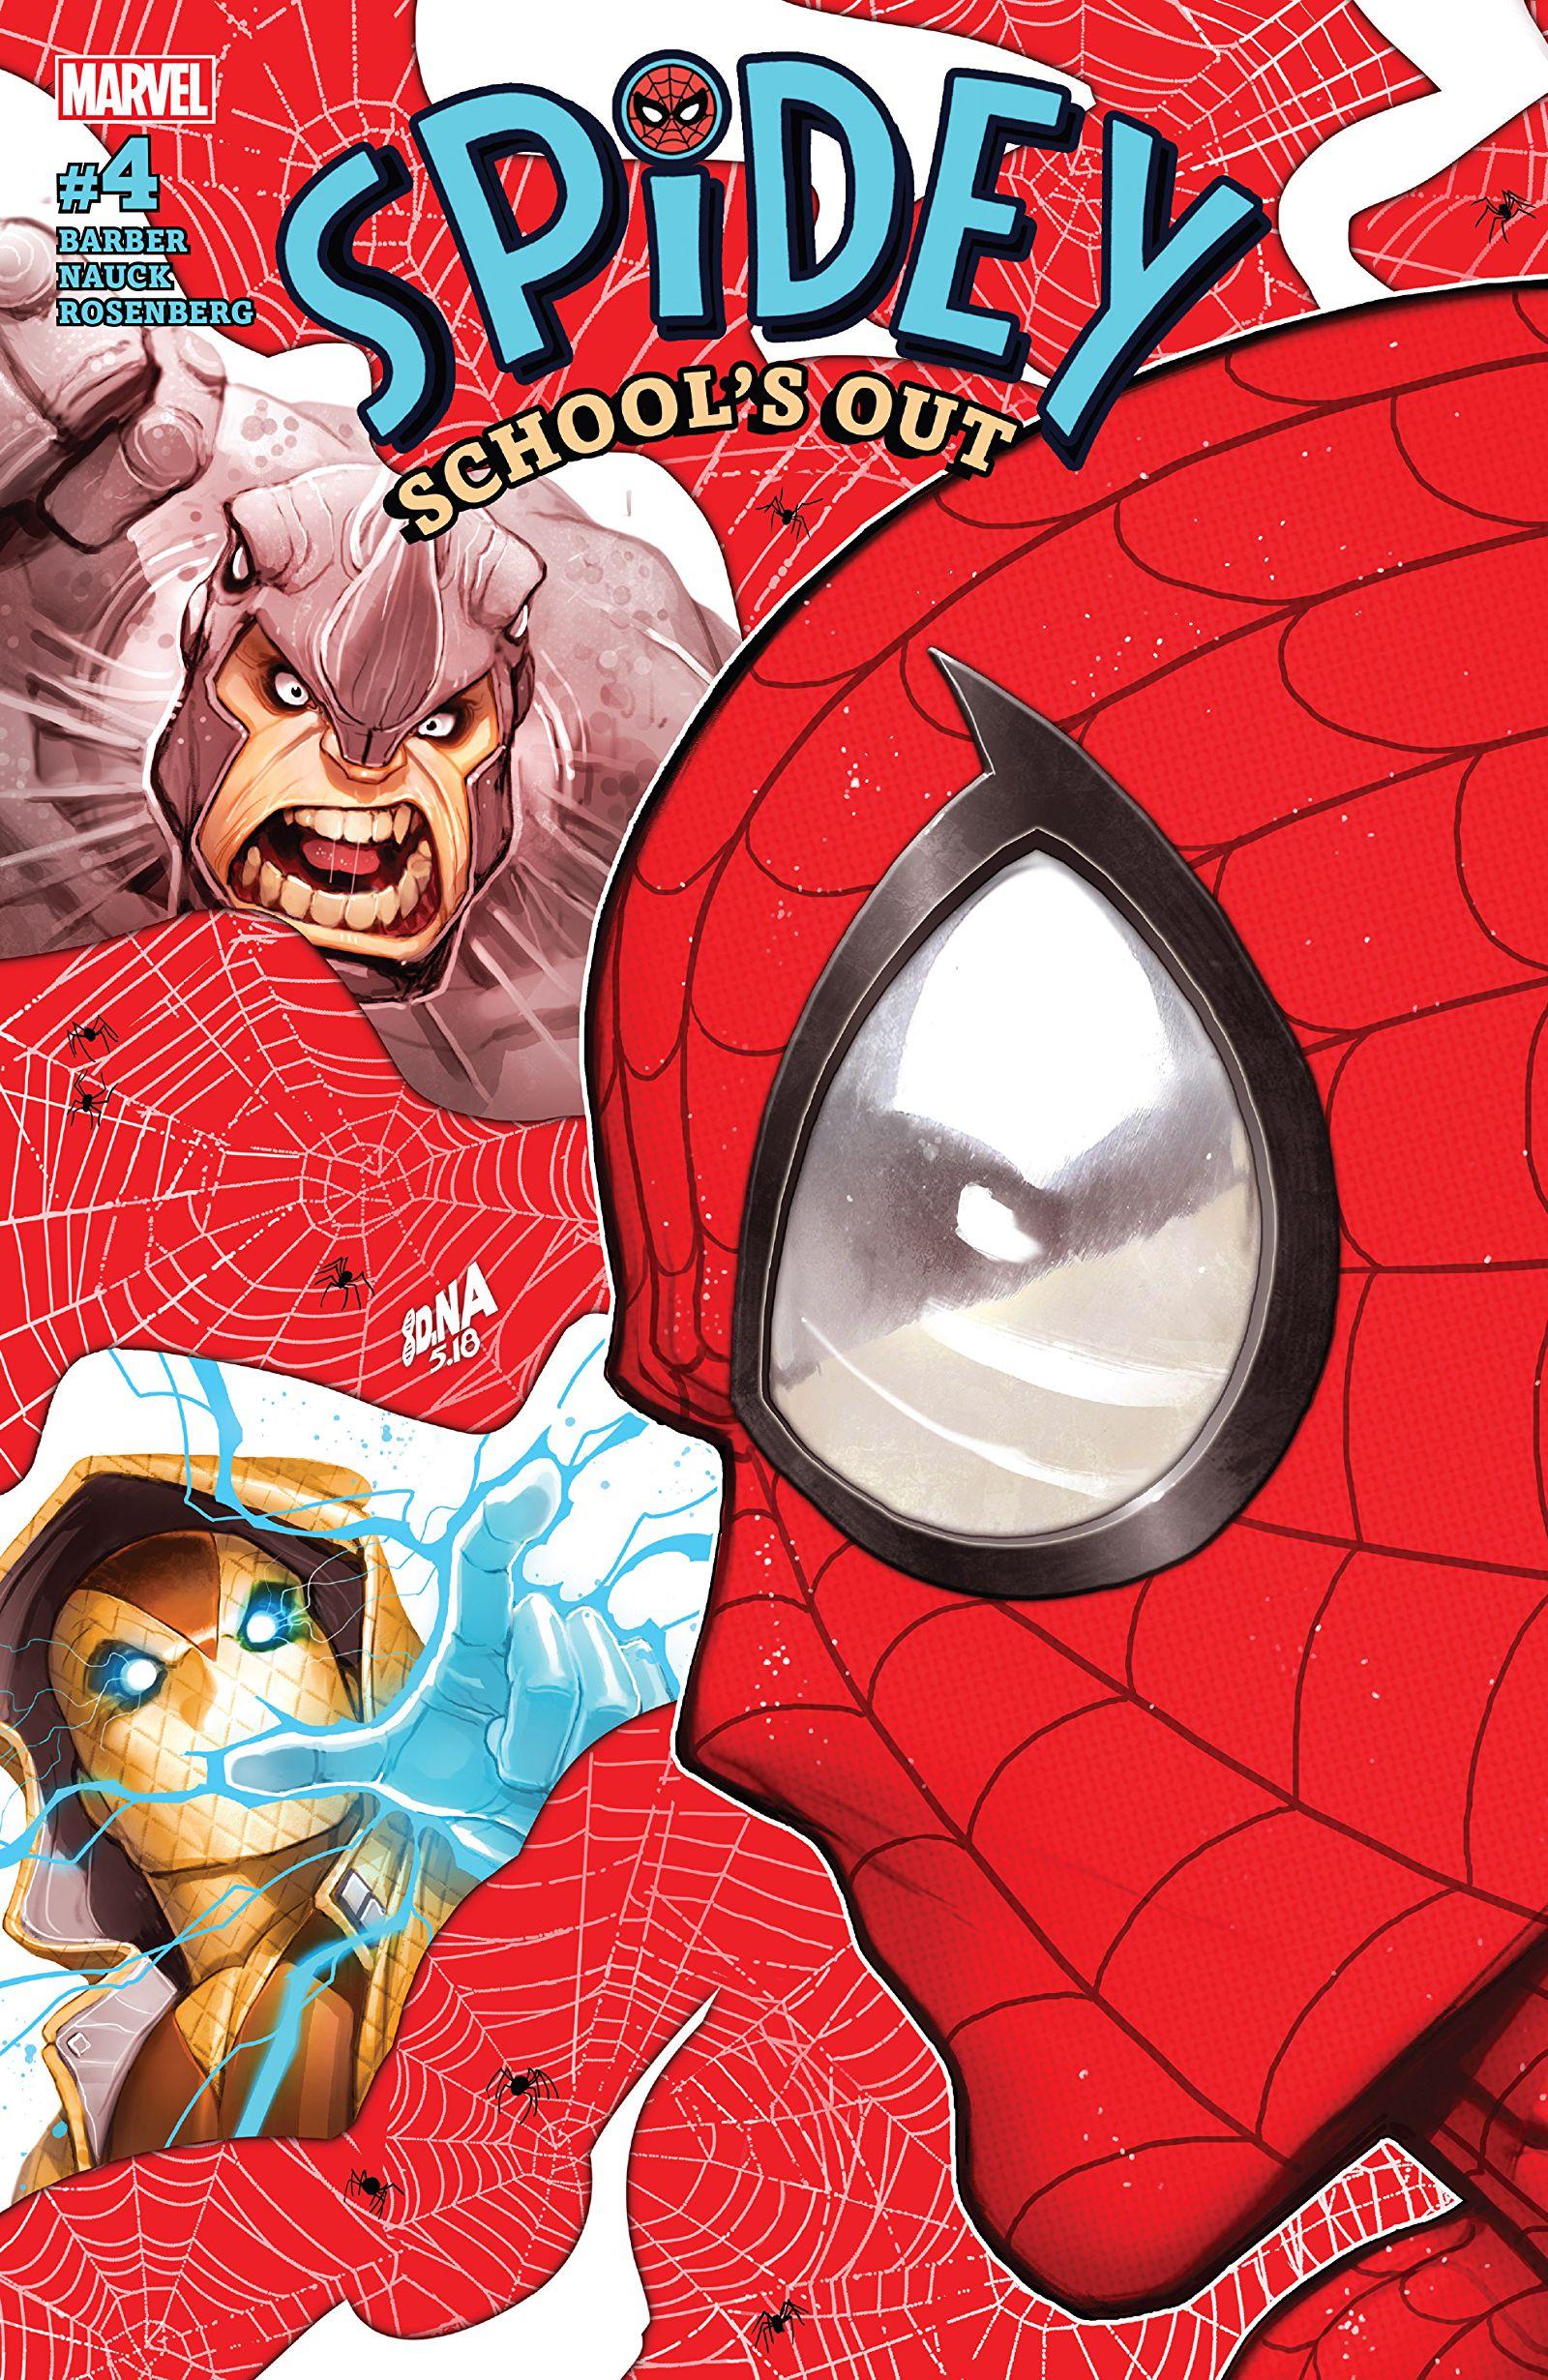 Spidey: School's Out Vol. 1 #4